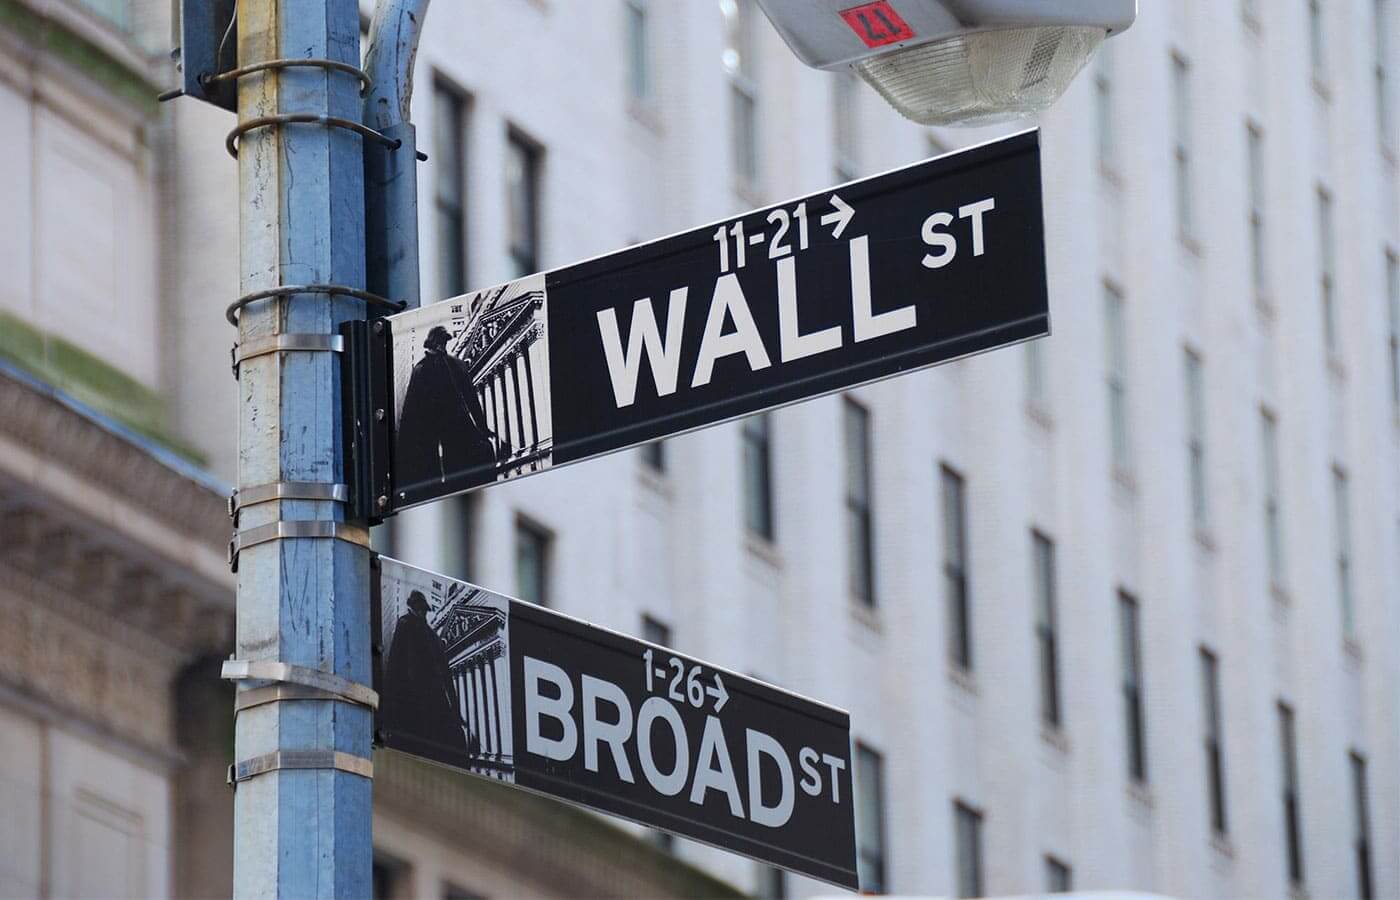 A sign in New York City pointing the way to Wall Street